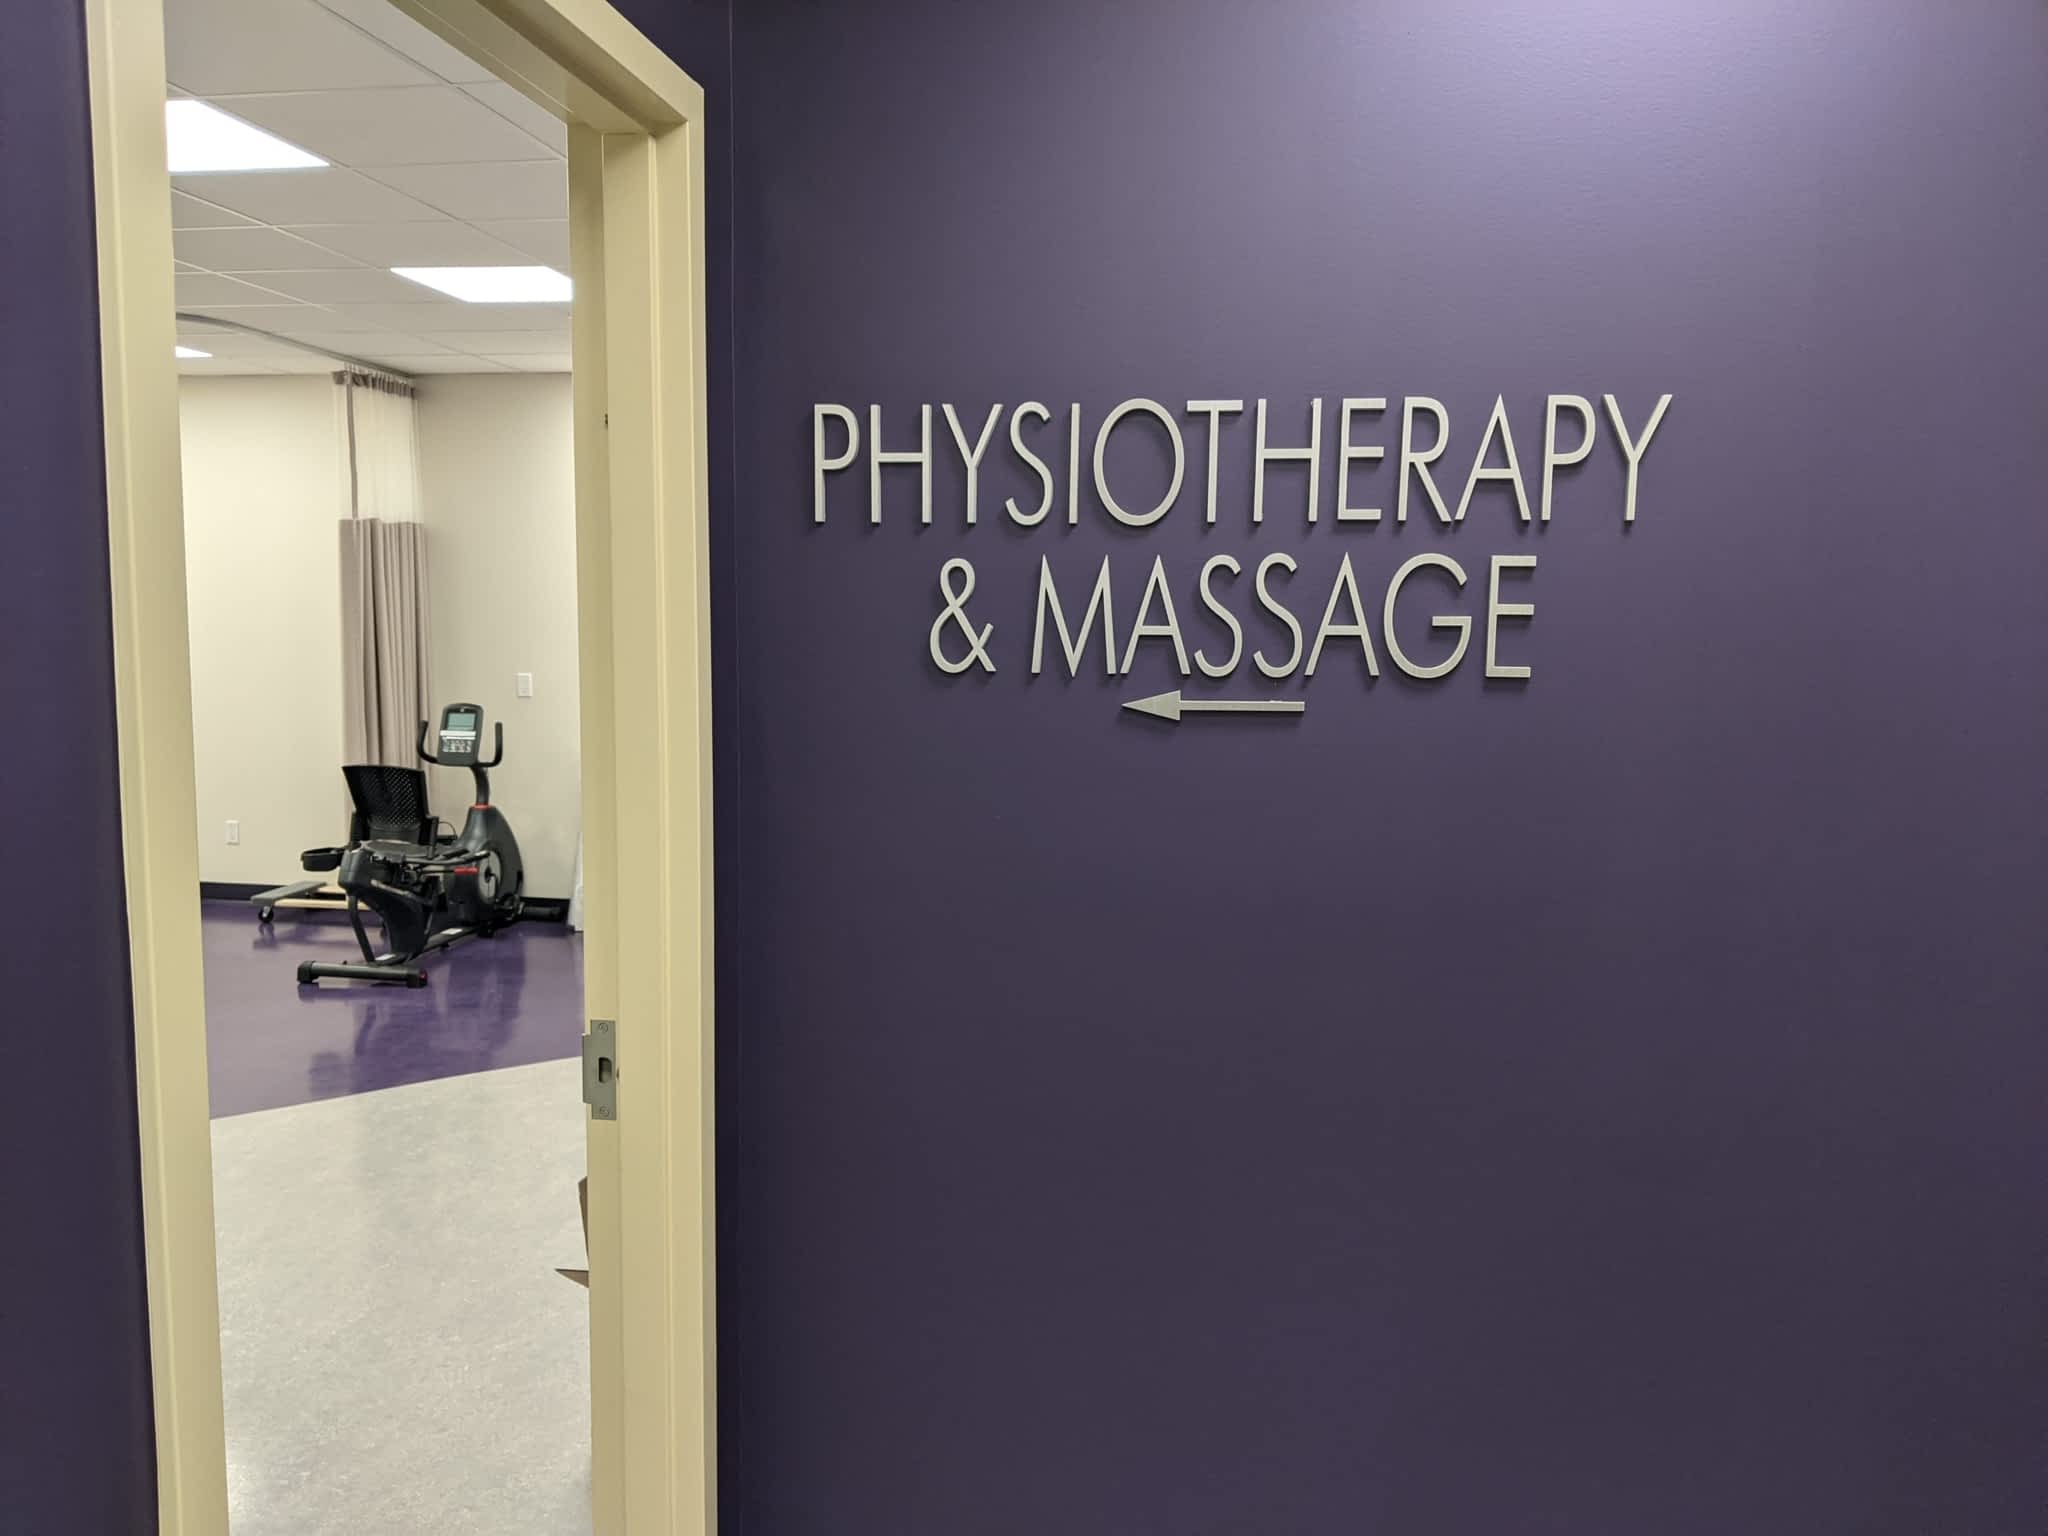 photo Excelsior Physiotherapy, Massage, Acupuncture